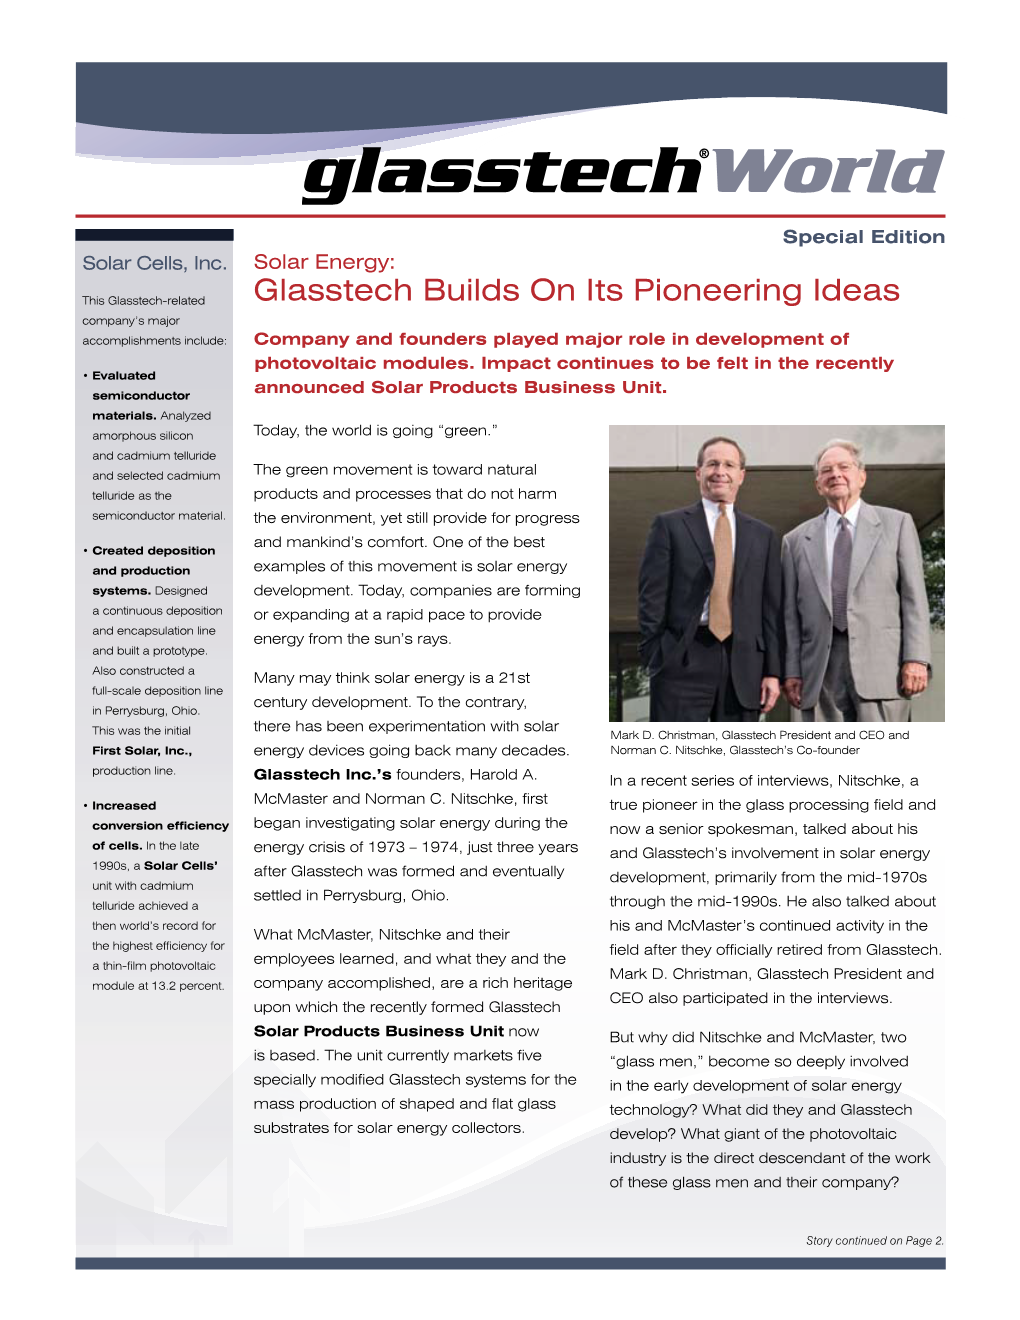 Glasstech Builds on Its Pioneering Ideas Company’S Major Accomplishments Include: Company and Founders Played Major Role in Development of Photovoltaic Modules